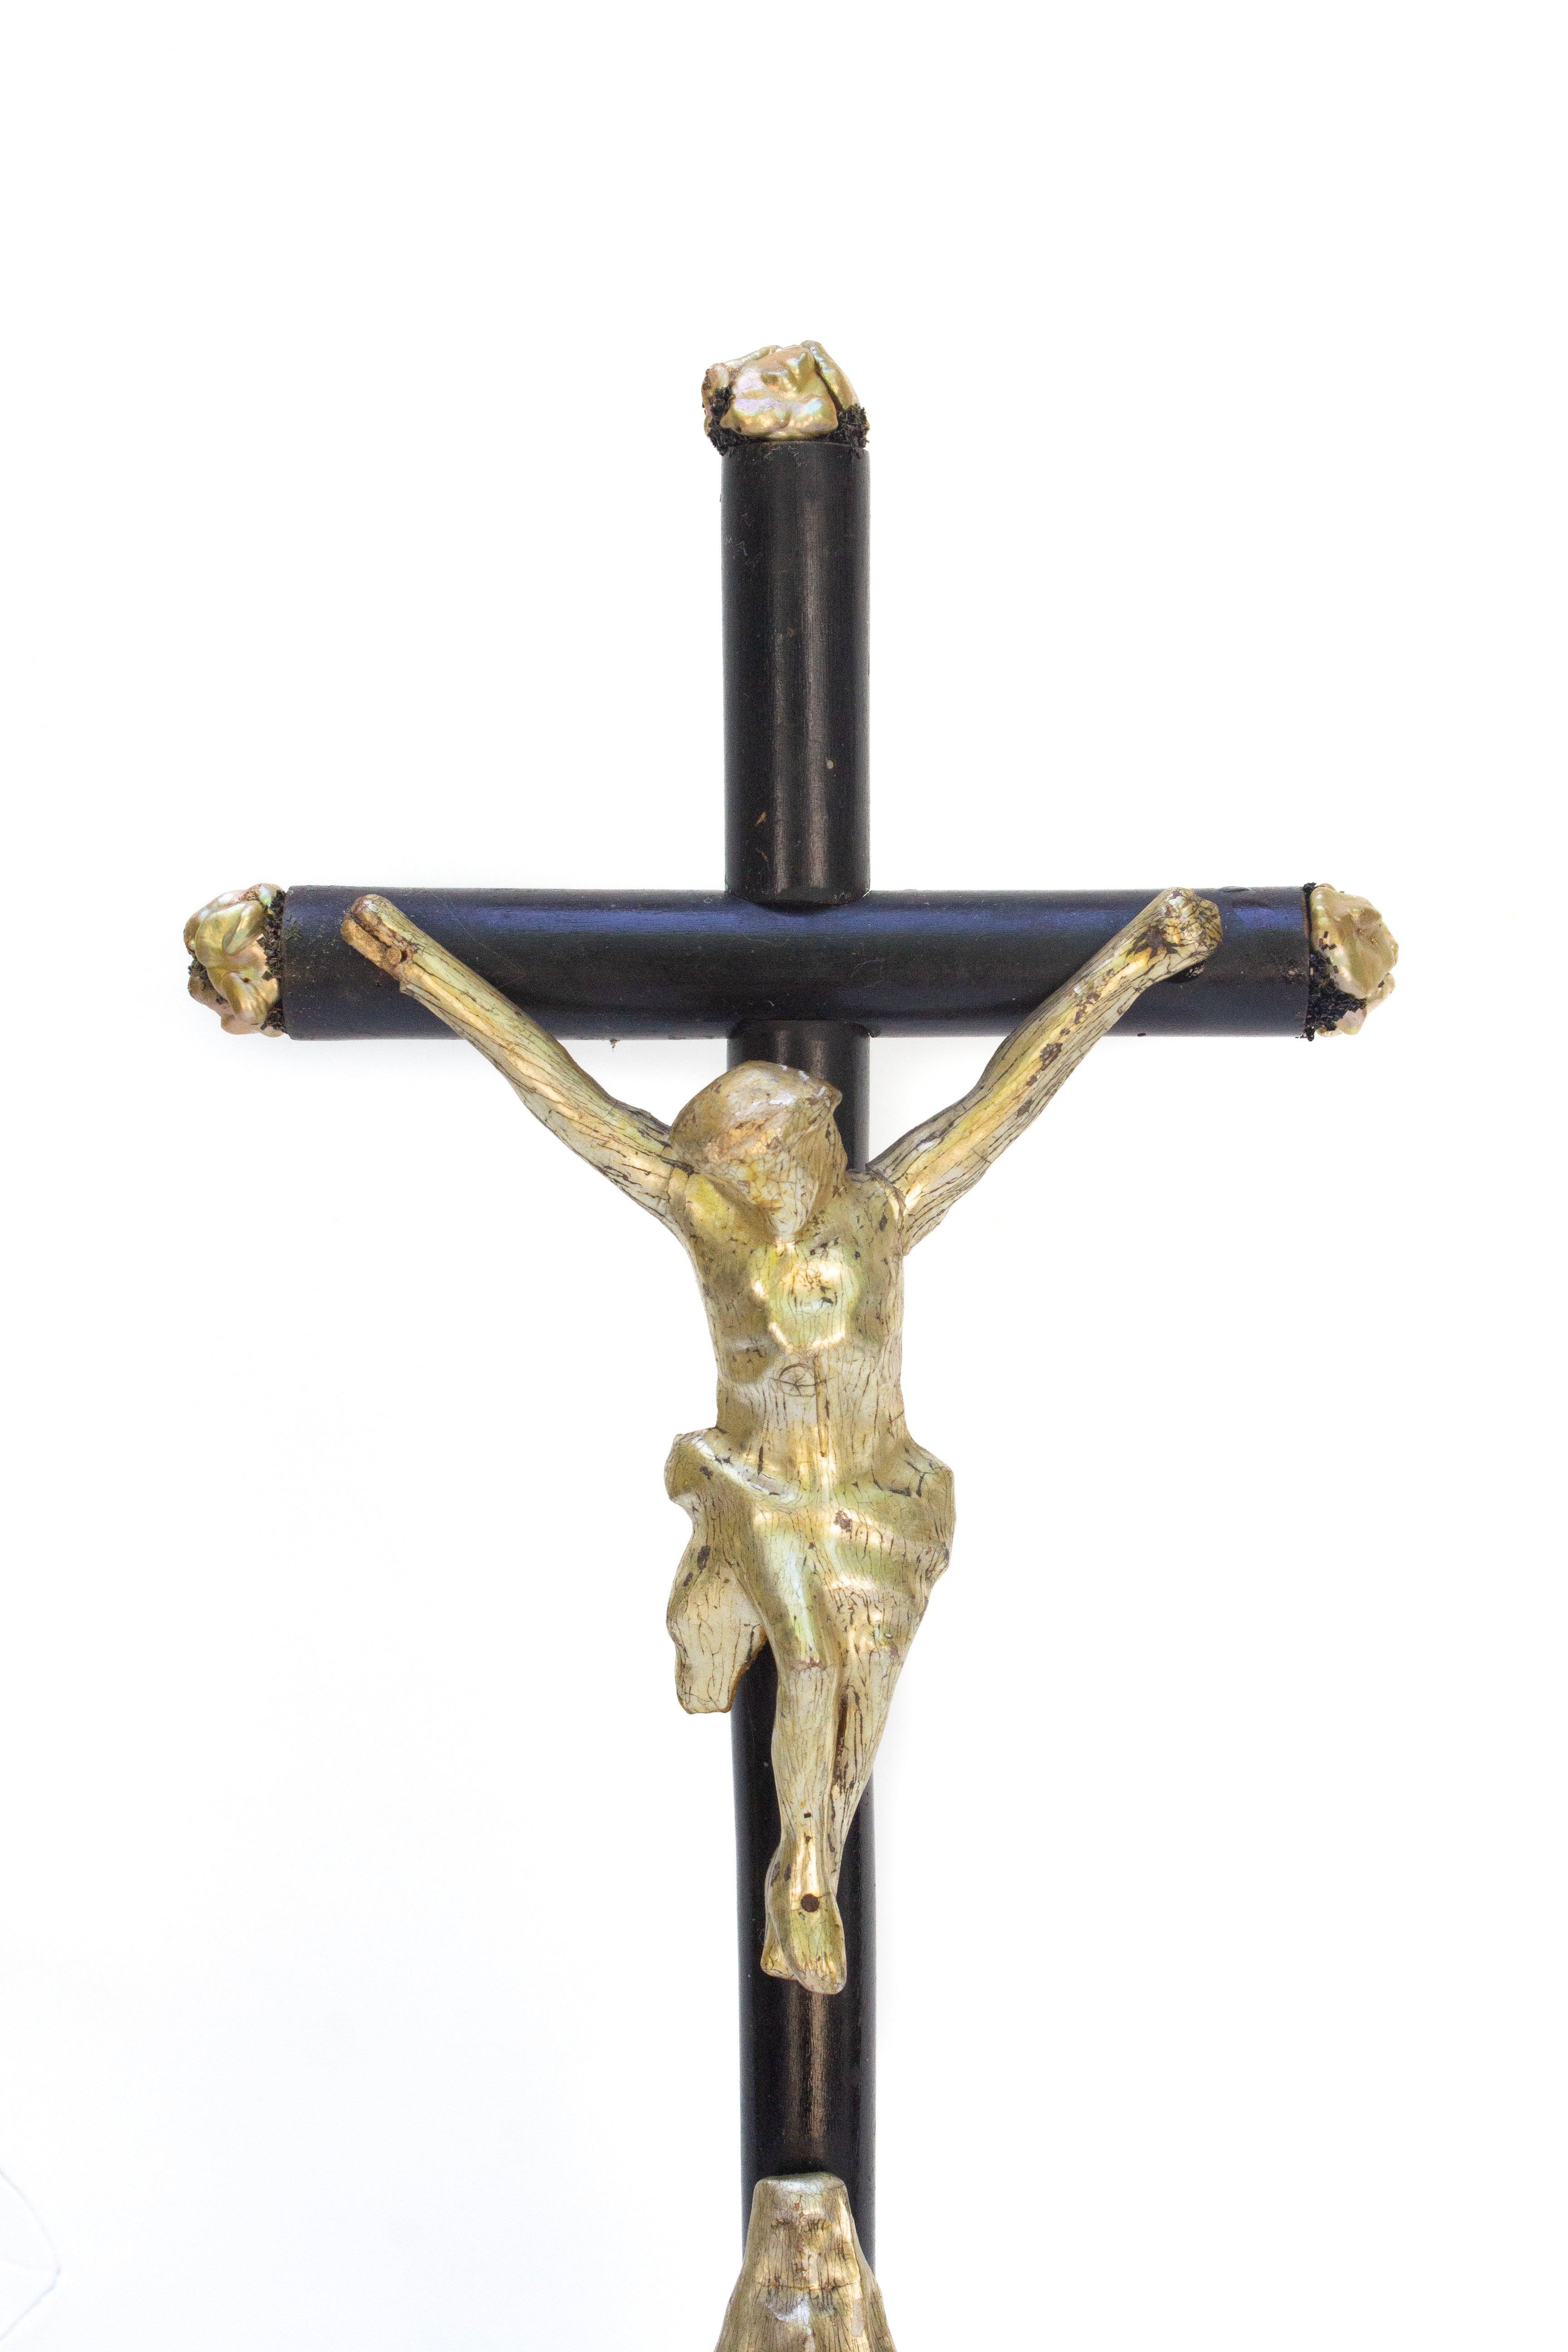 Neoclassical 19th Century Italian Black Crucifix with a Pearlescent Gold Figure of Christ